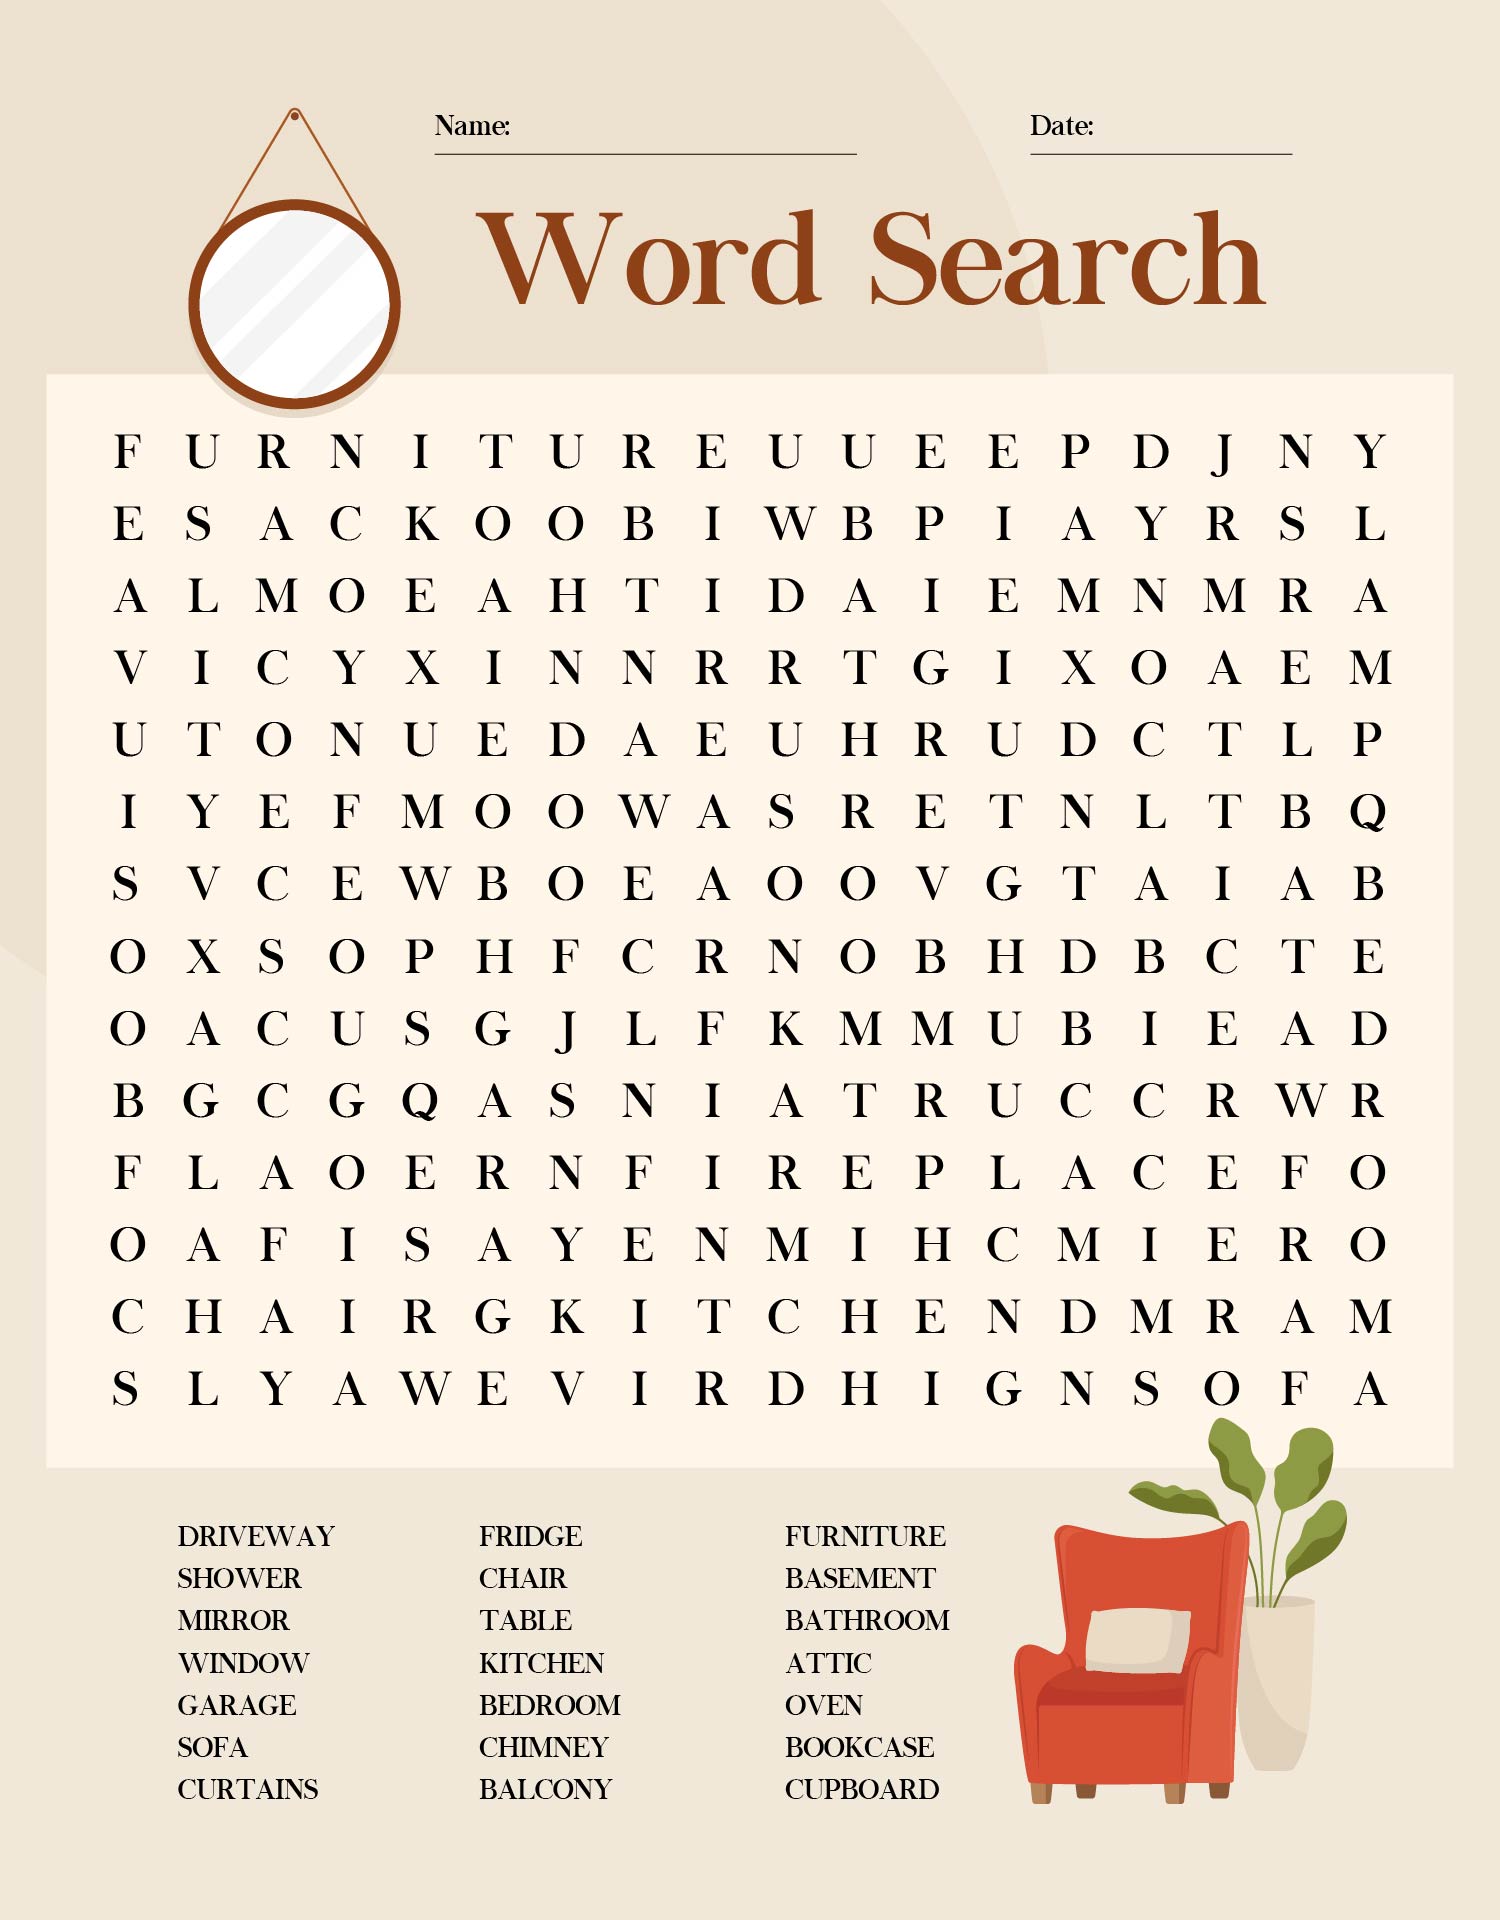 one-lovely-day-free-christmas-word-search